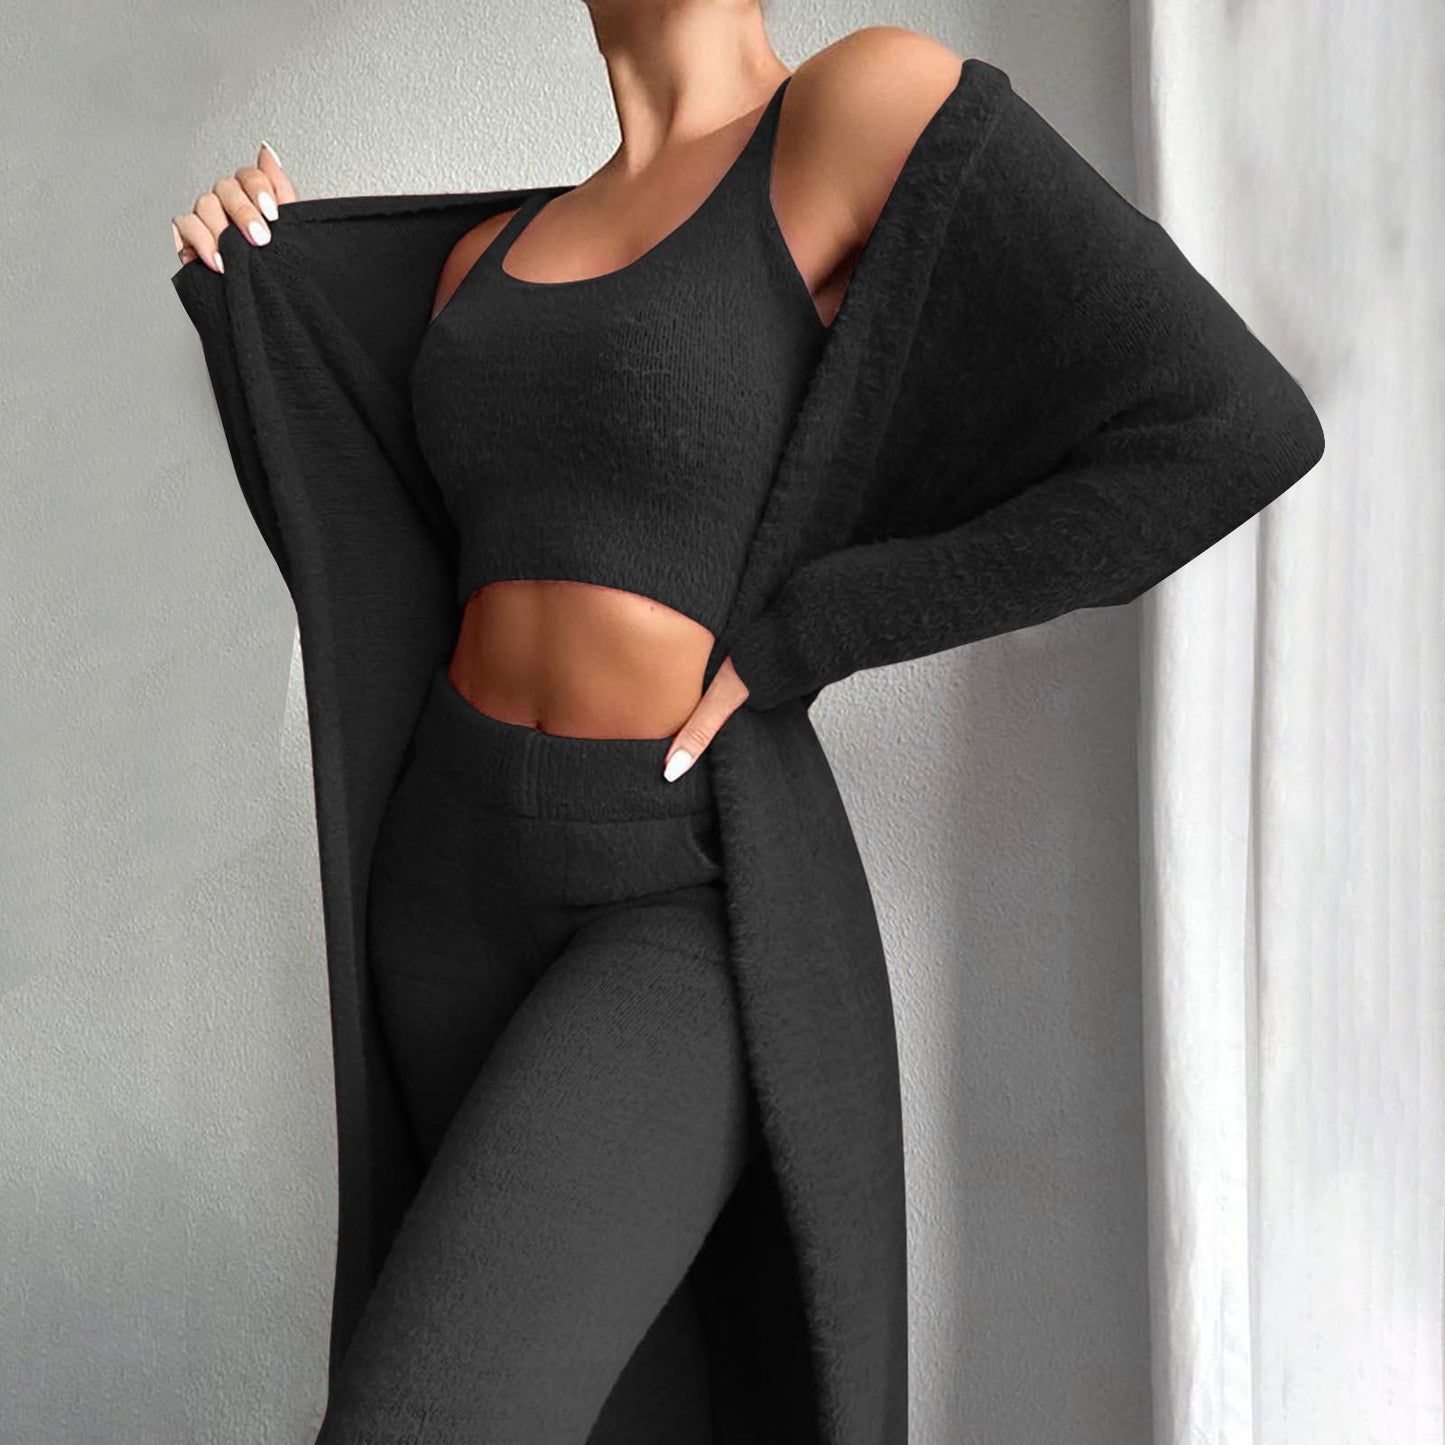 Kendall - Long-sleeved, cozy set